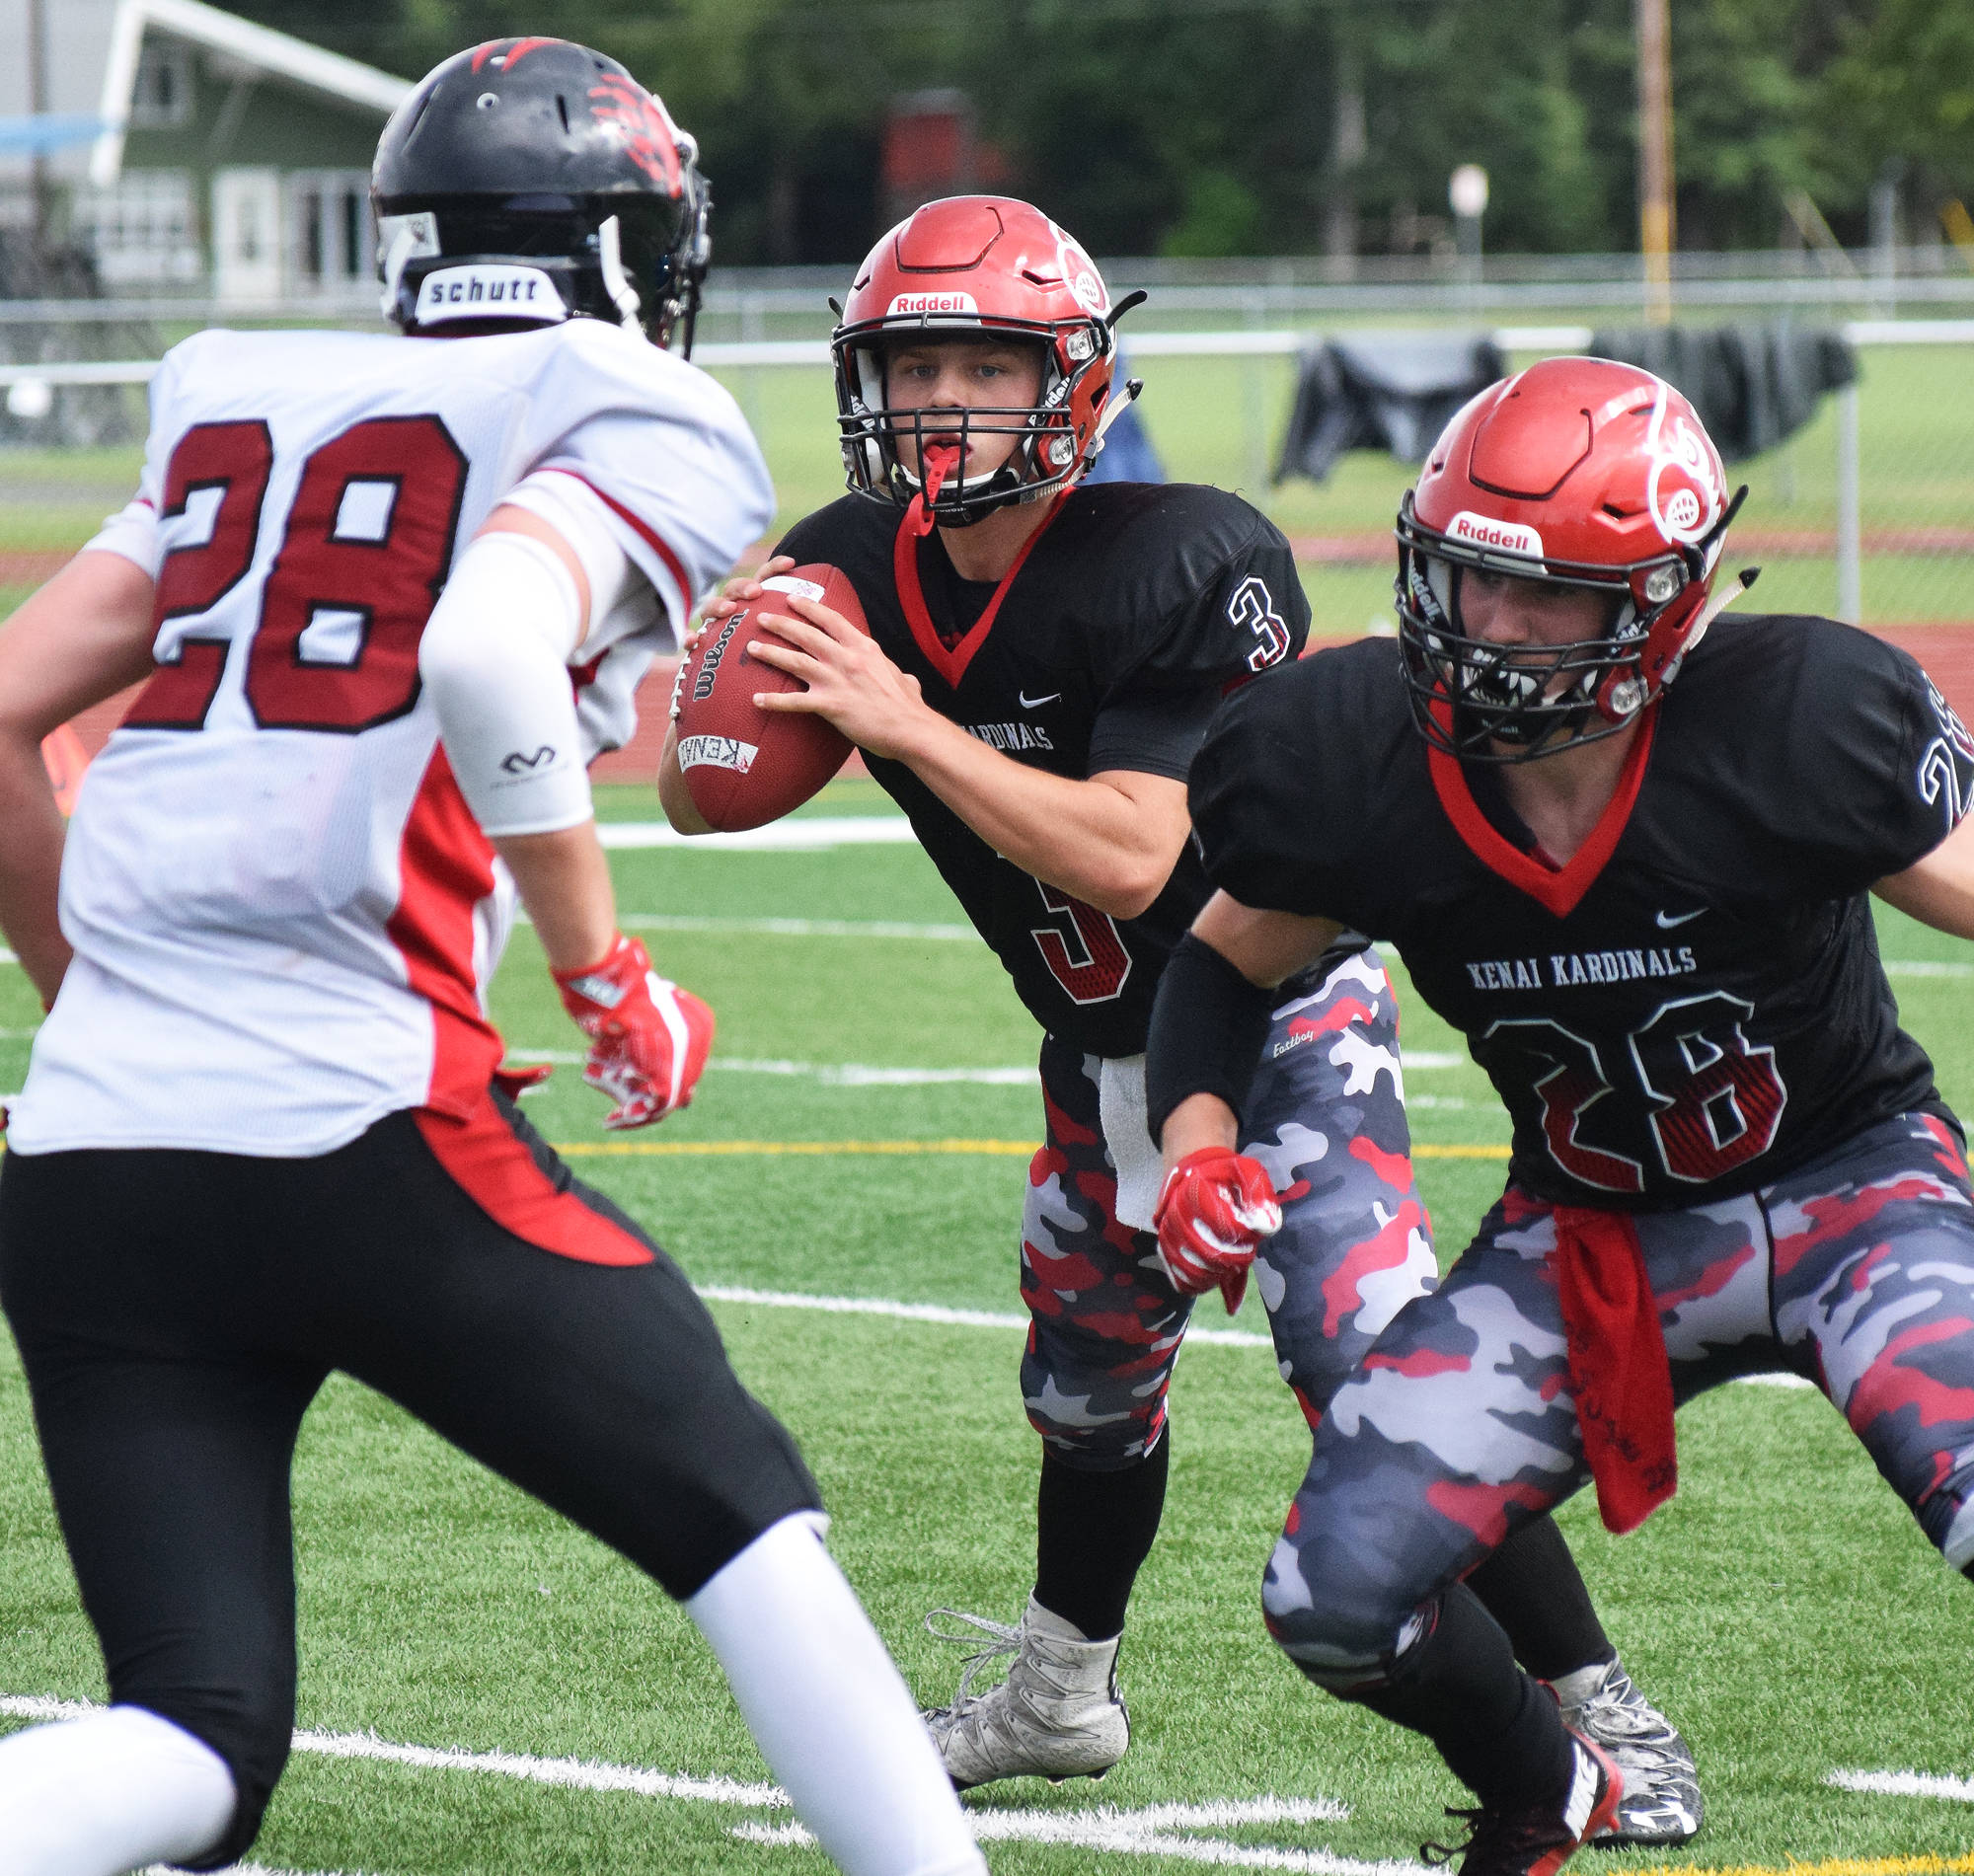 Kenai Central quarterback Connor Felchle looks for an open receiver against Juneau while teammate Rykker Riddall (28) puts up a block Aug. 26, 2017, at Ed Hollier Field in Kenai. (Photo by Joey Klecka/Peninsula Clarion)